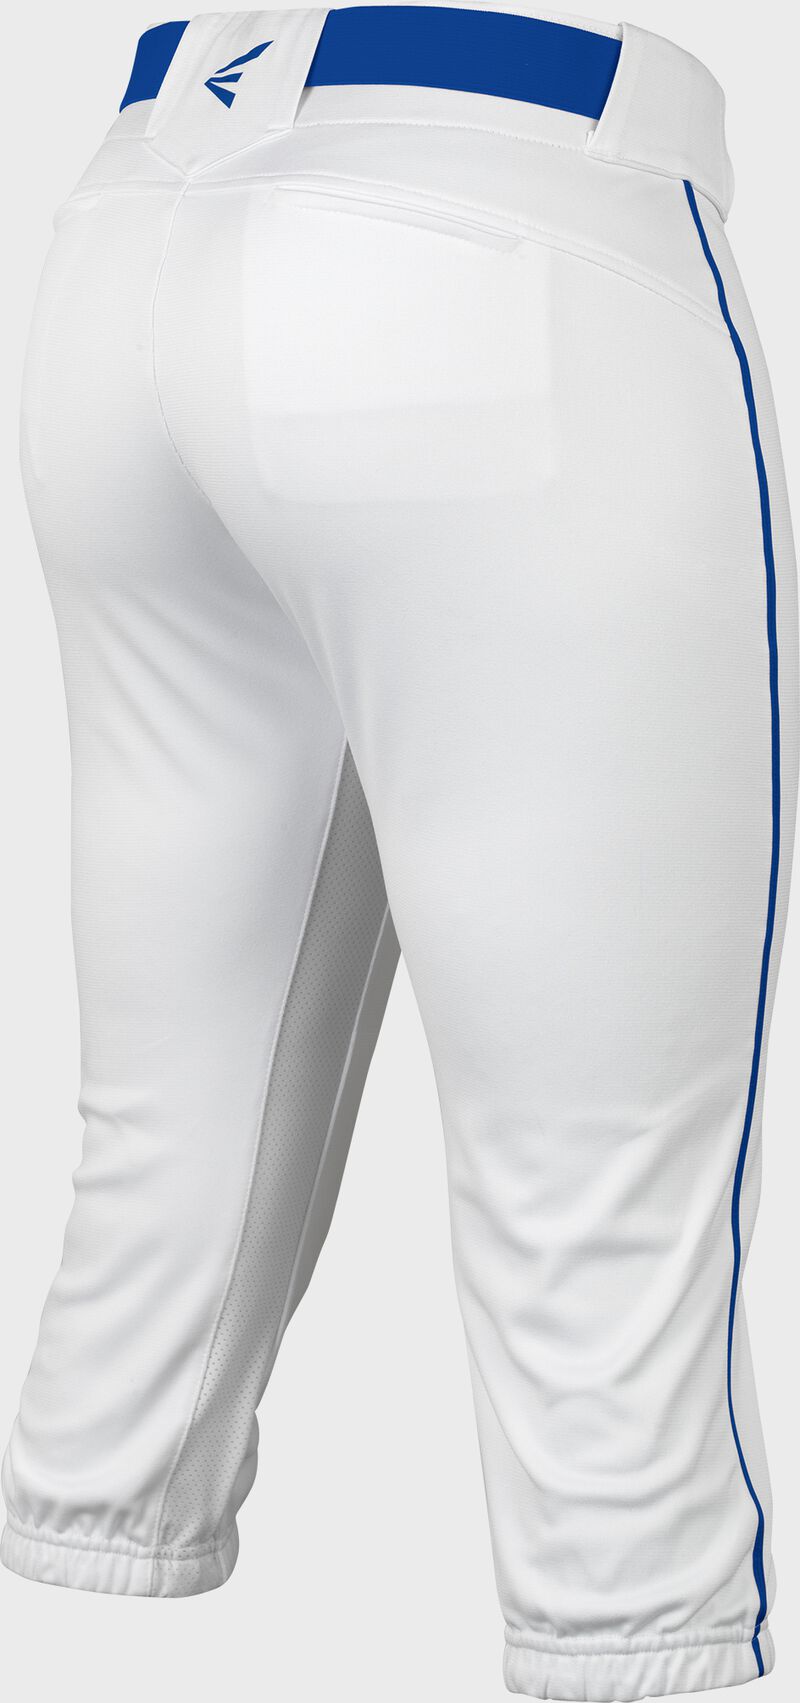 Easton Prowess Softball Pant Women's Piped WHITE/ROYAL  XXL image number null